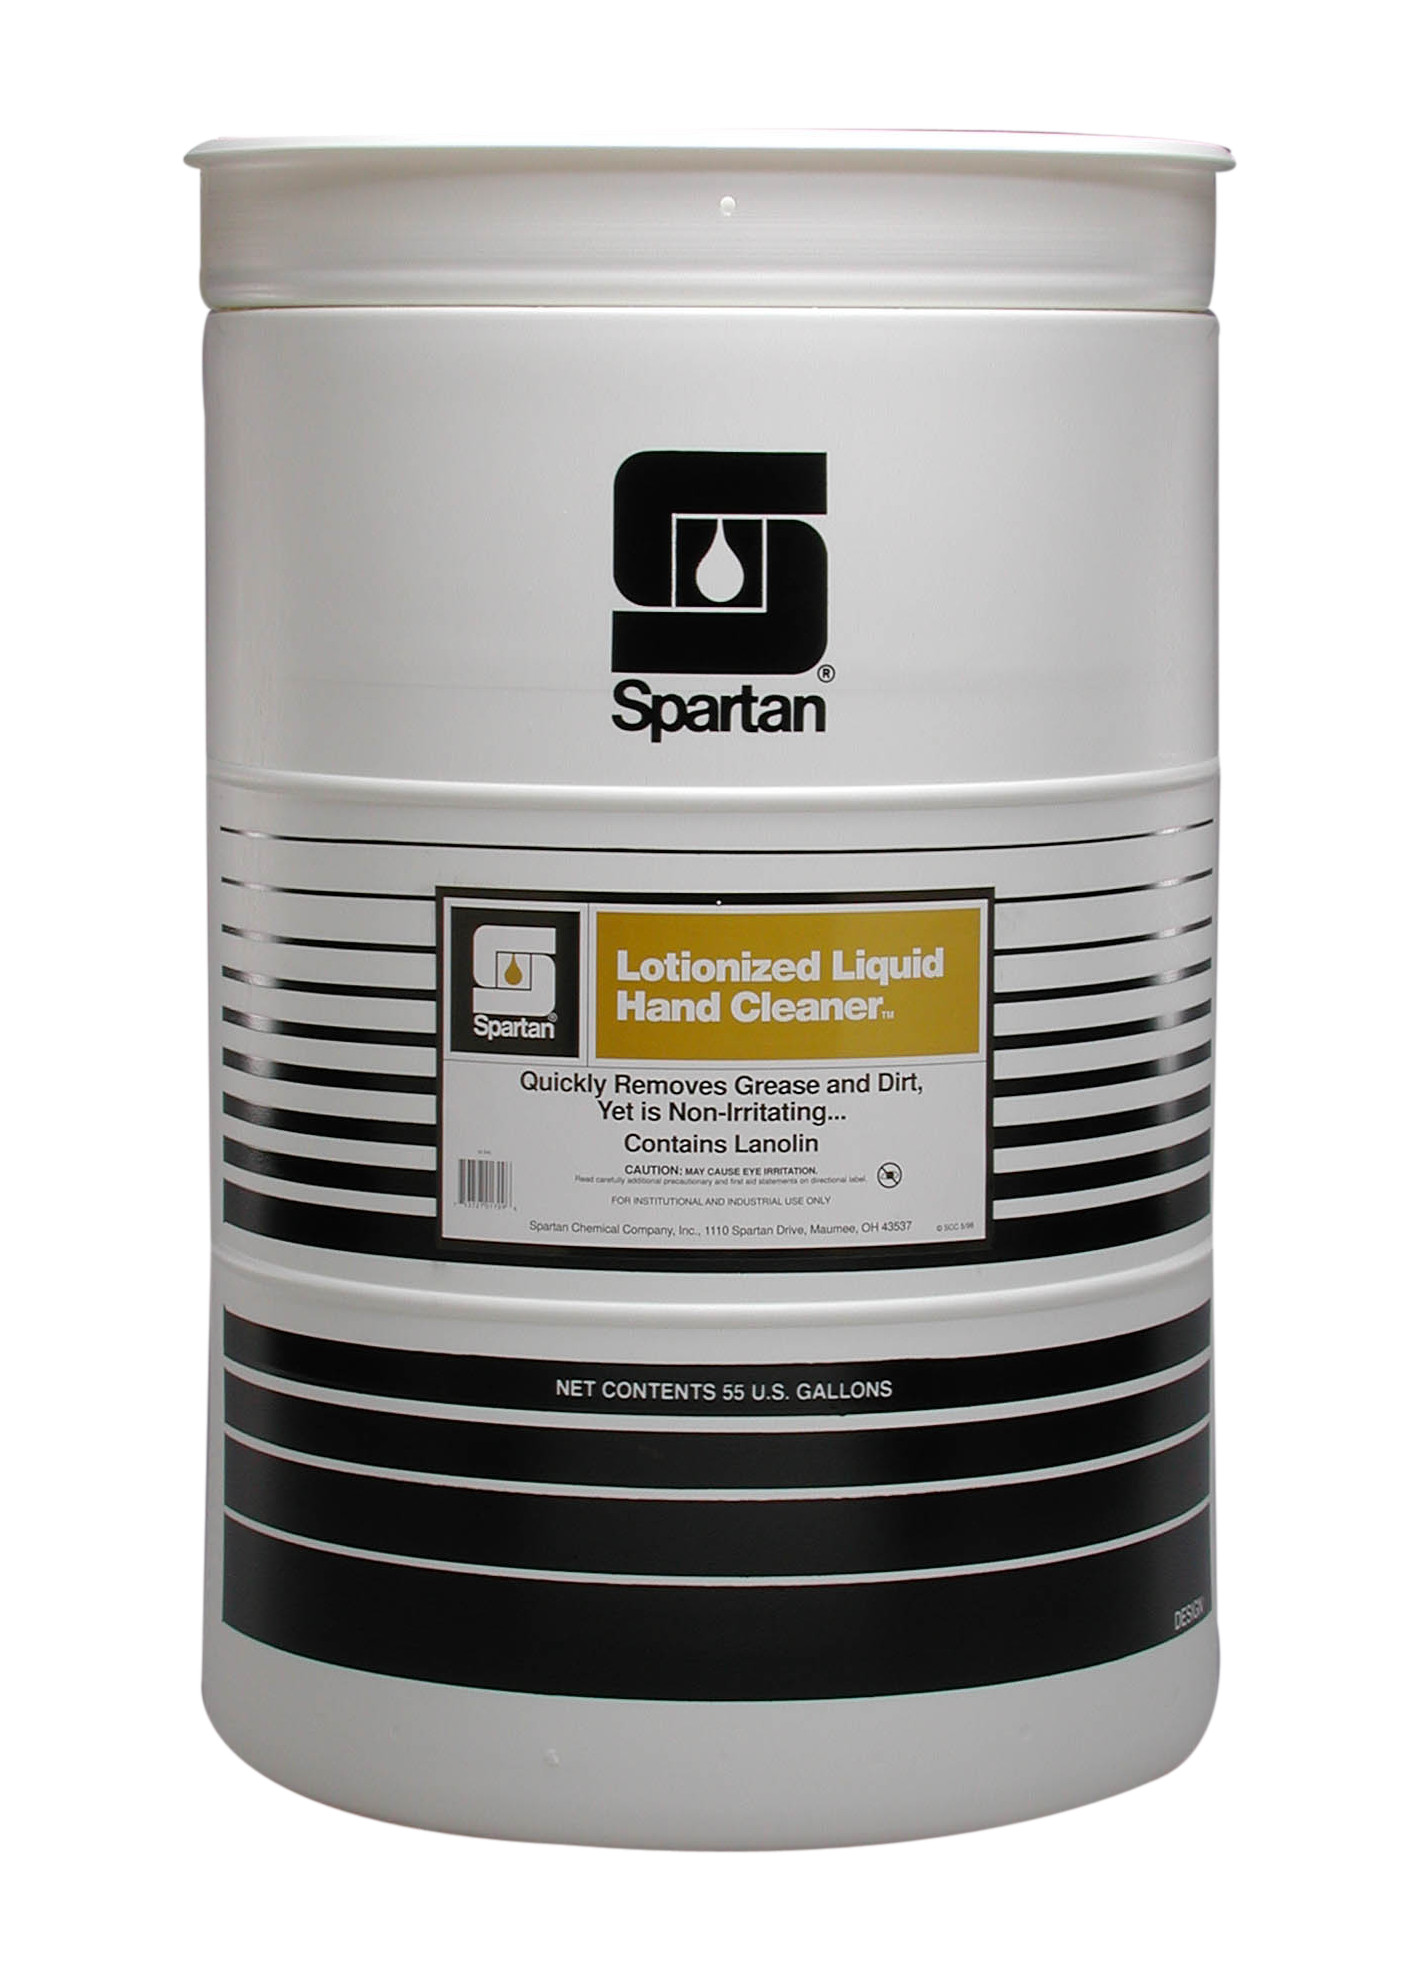 Spartan Chemical Company Lotionized Liquid Hand Cleaner, 55 GAL DRUM